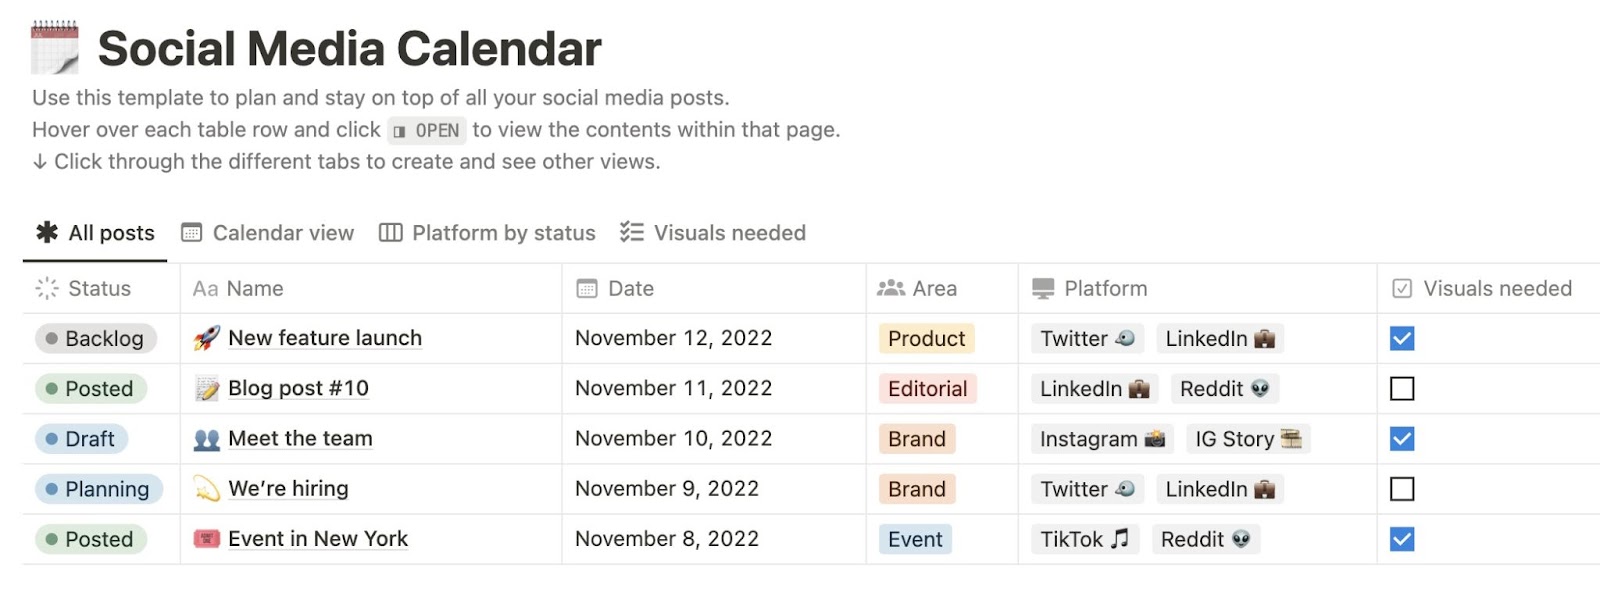 Social media calendar template connected  Notion with sections for station  name, status, date, and platforms to beryllium  posted on.